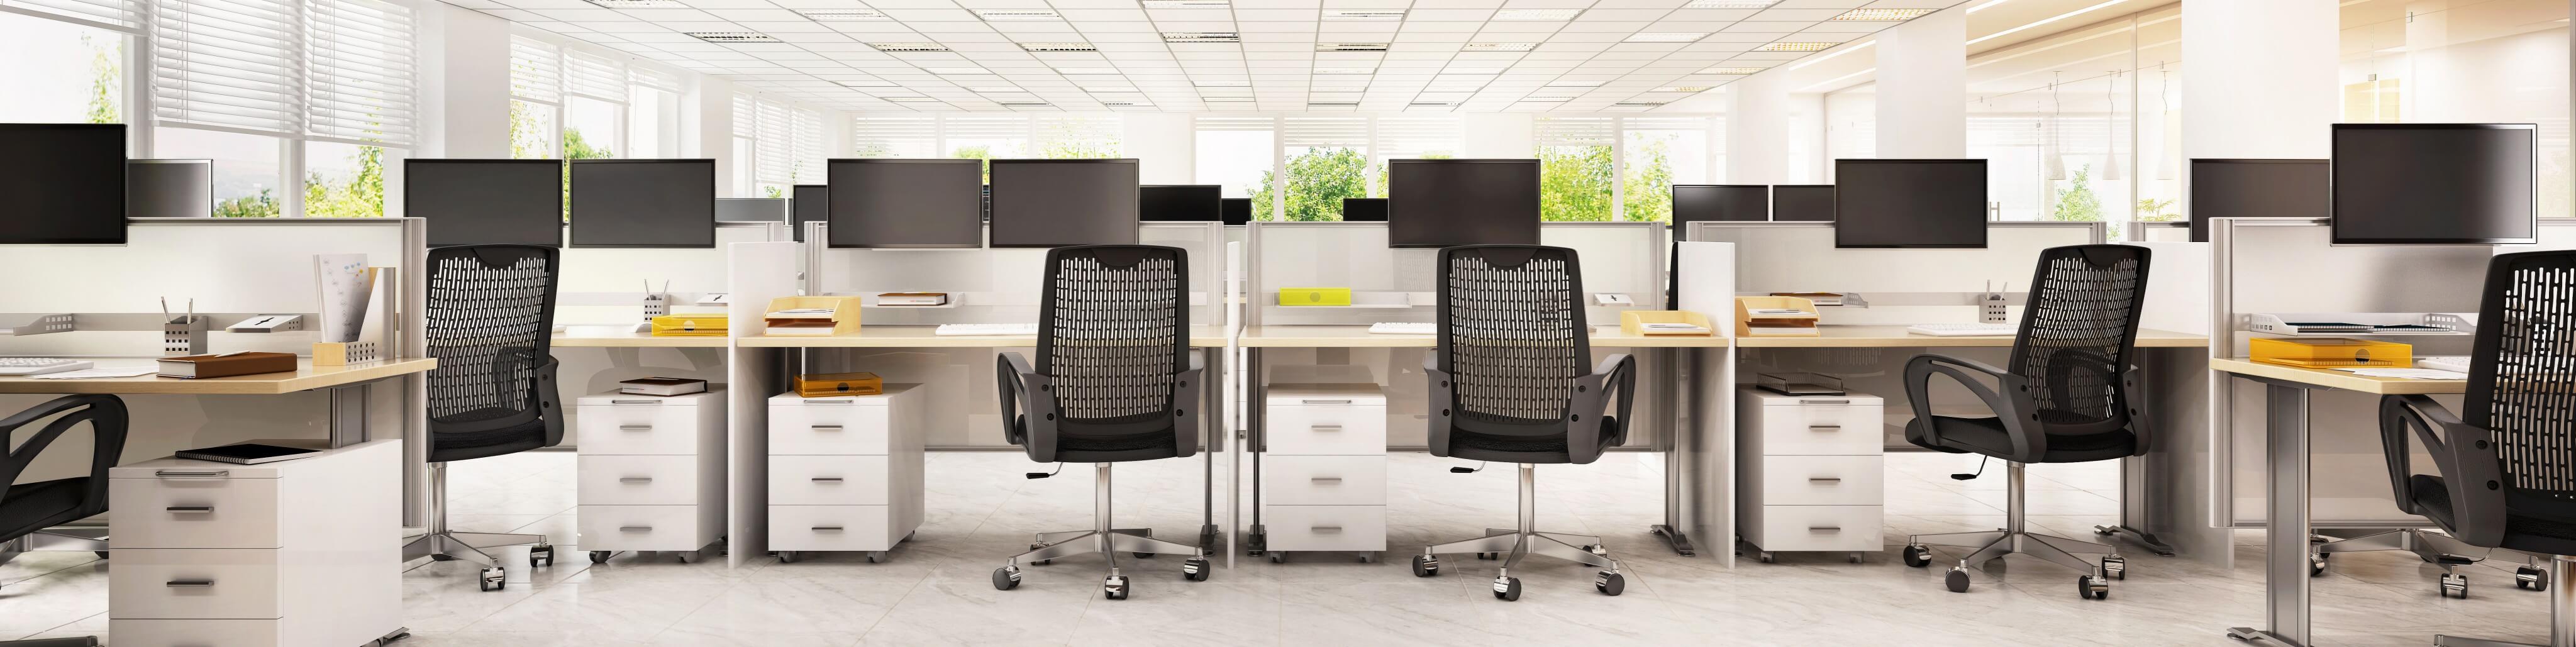 How to choose an ergonomic office chair